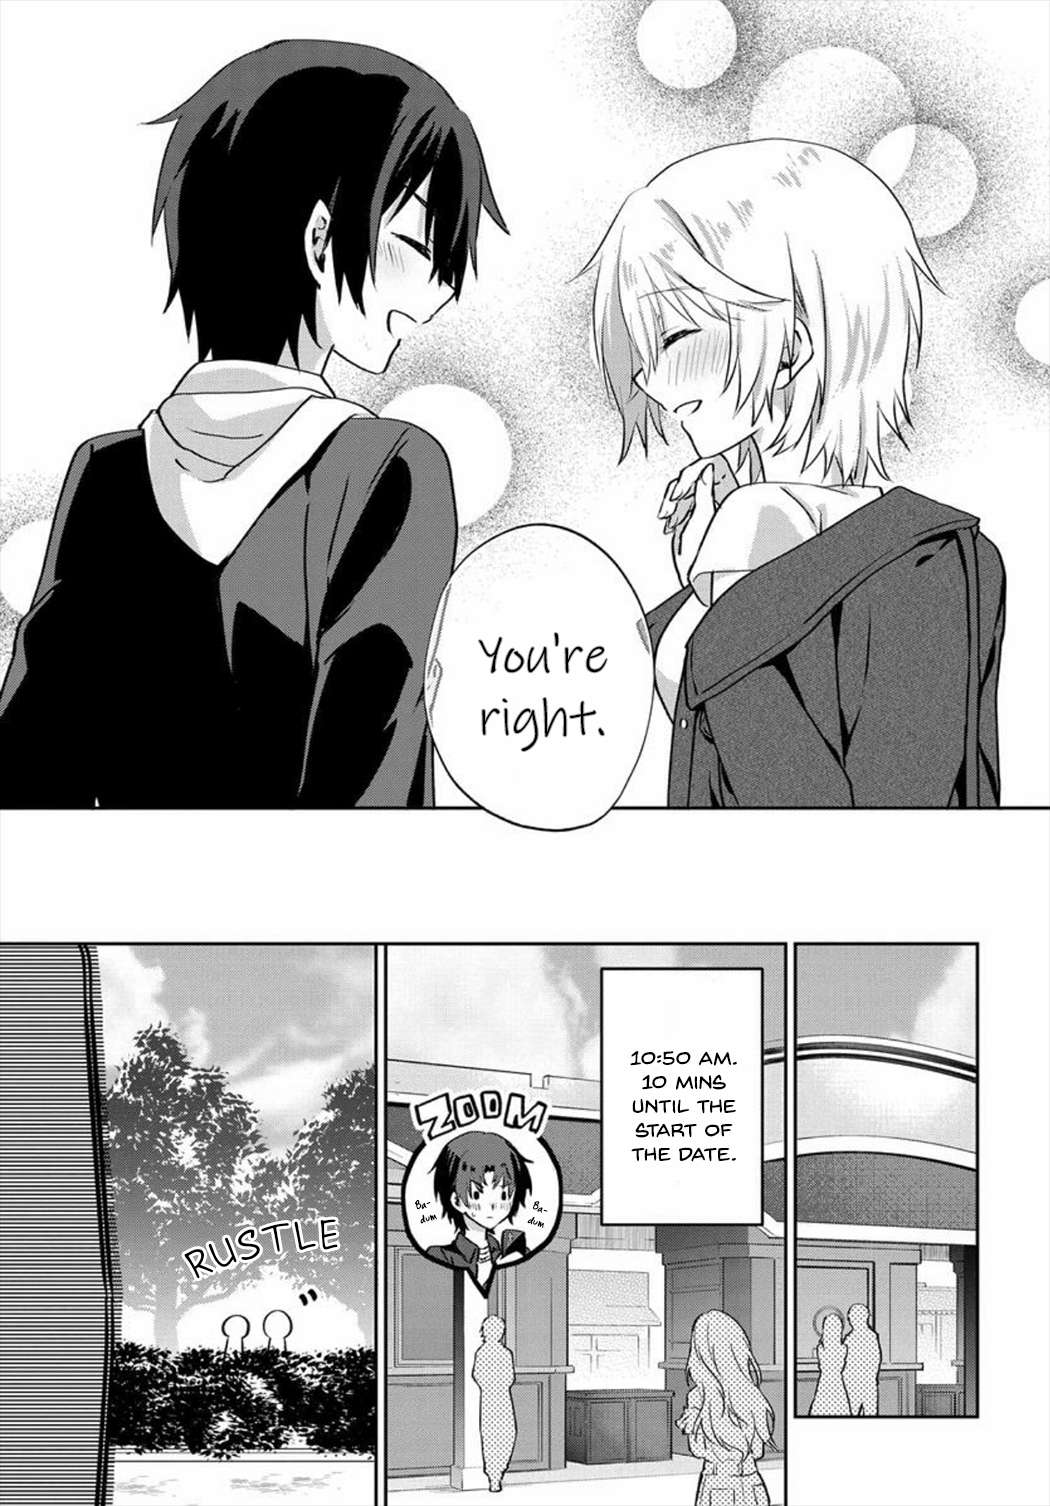 Since I’Ve Entered The World Of Romantic Comedy Manga, I’Ll Do My Best To Make The Losing Heroine Happy - chapter 6.2 - #4